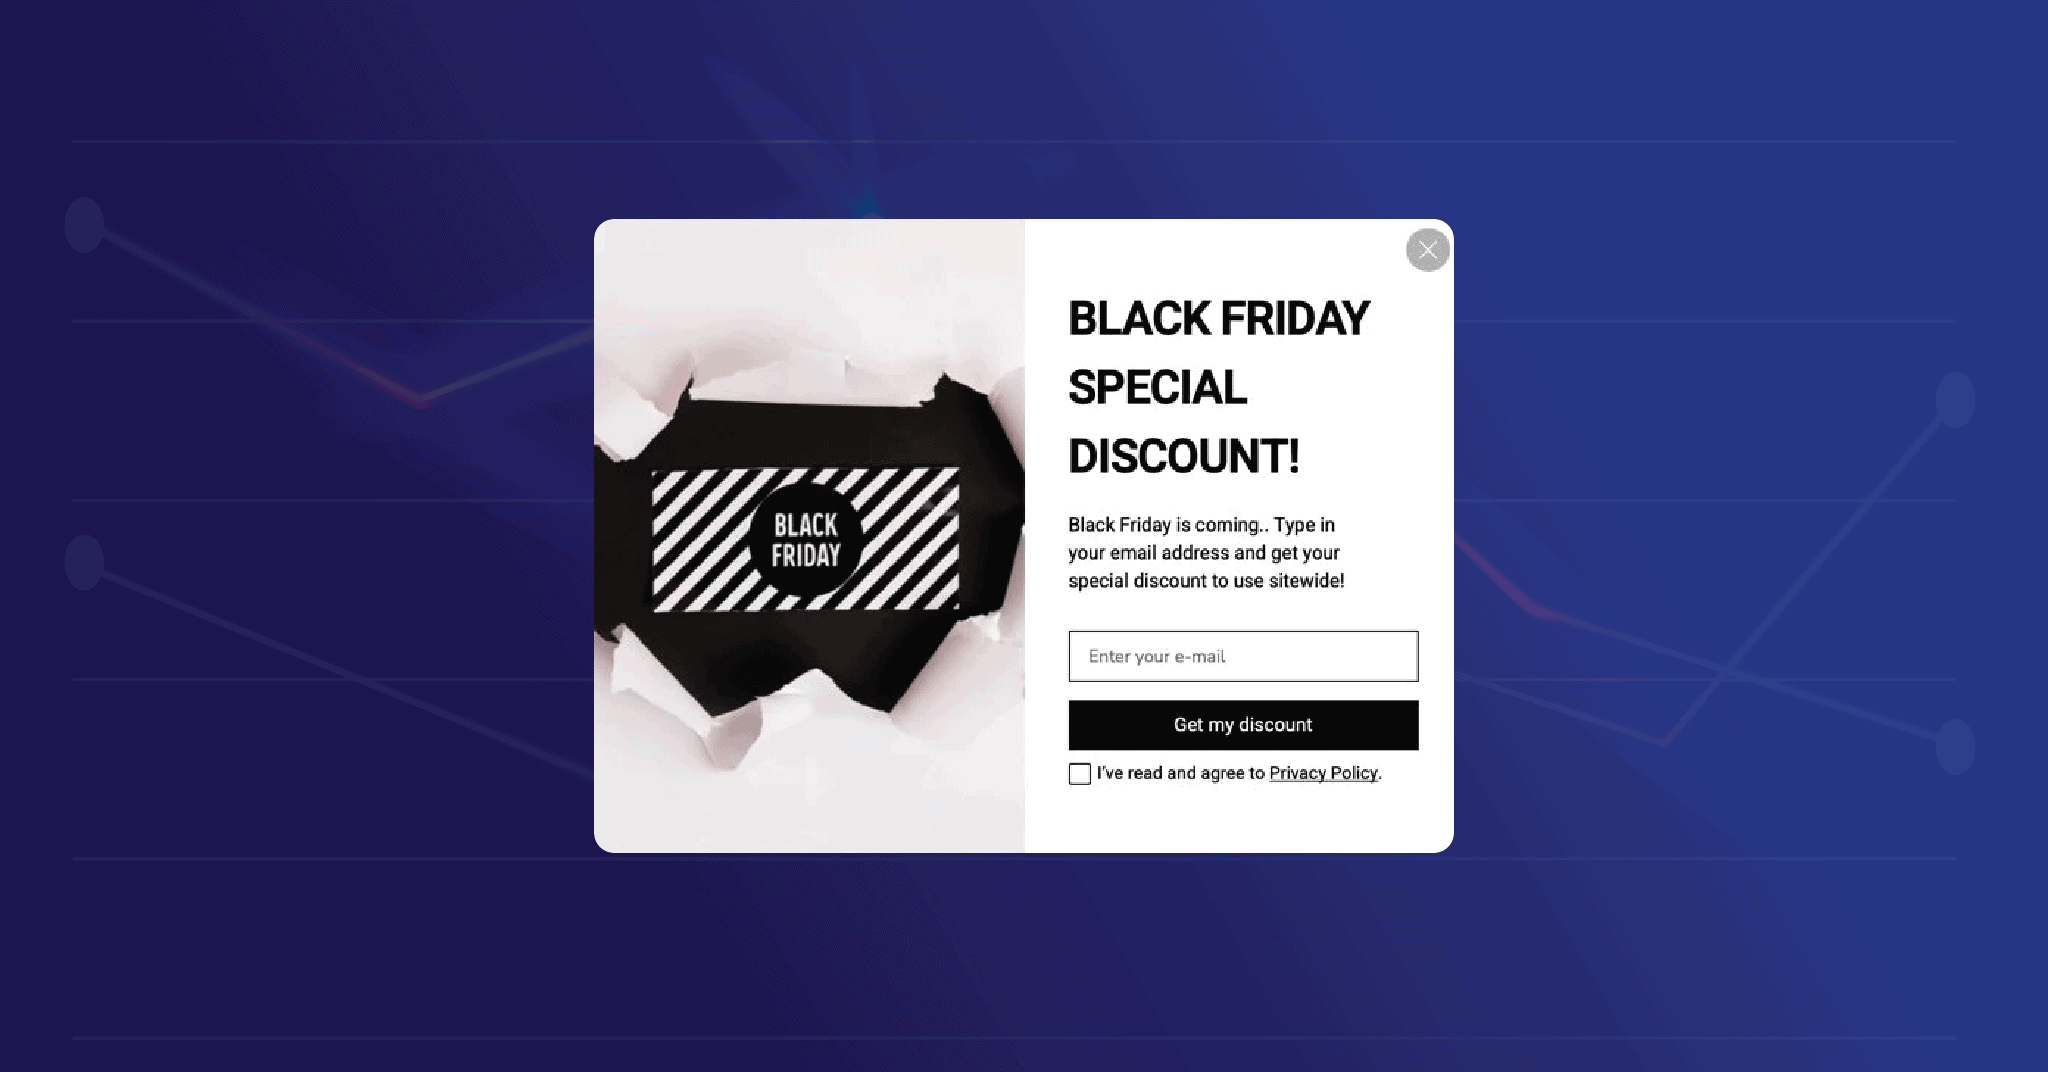 Black Friday Special Discount 